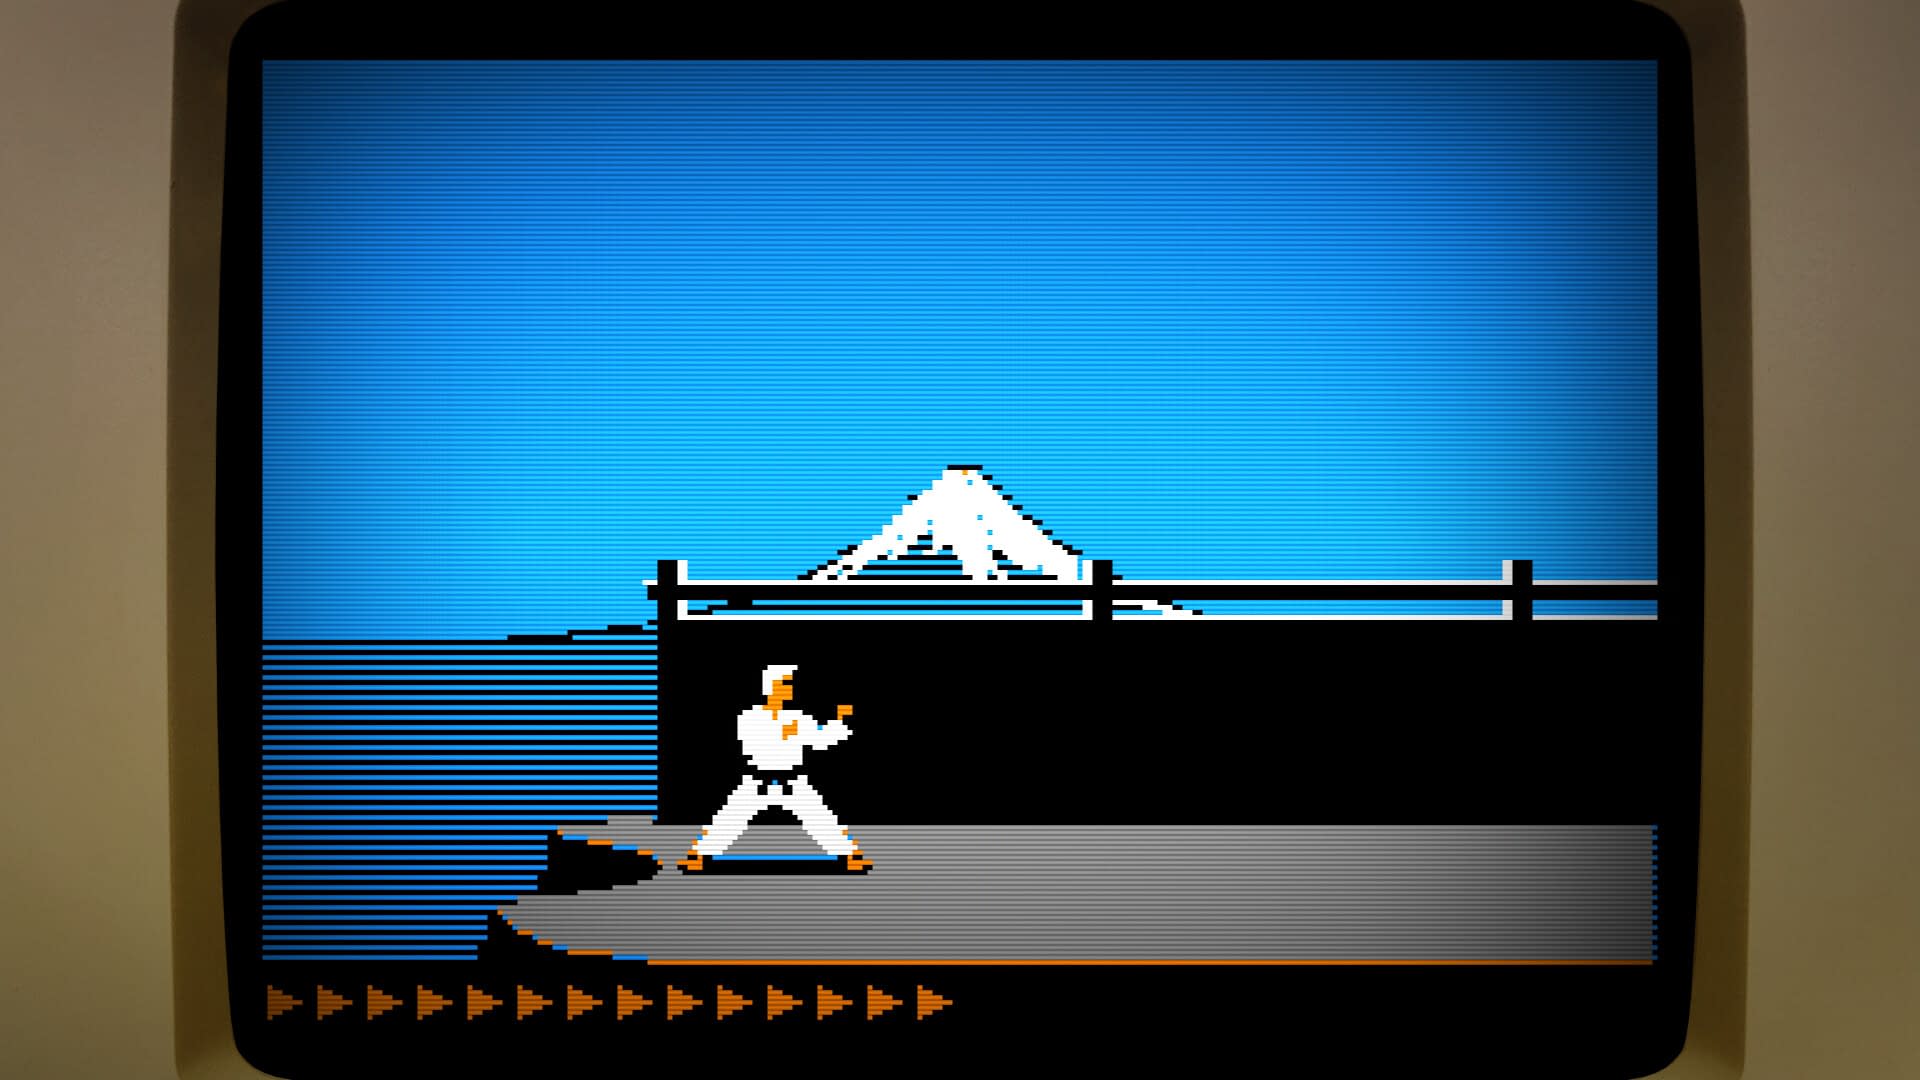 The Game of our childhood comes from Karateka, Remaster Version